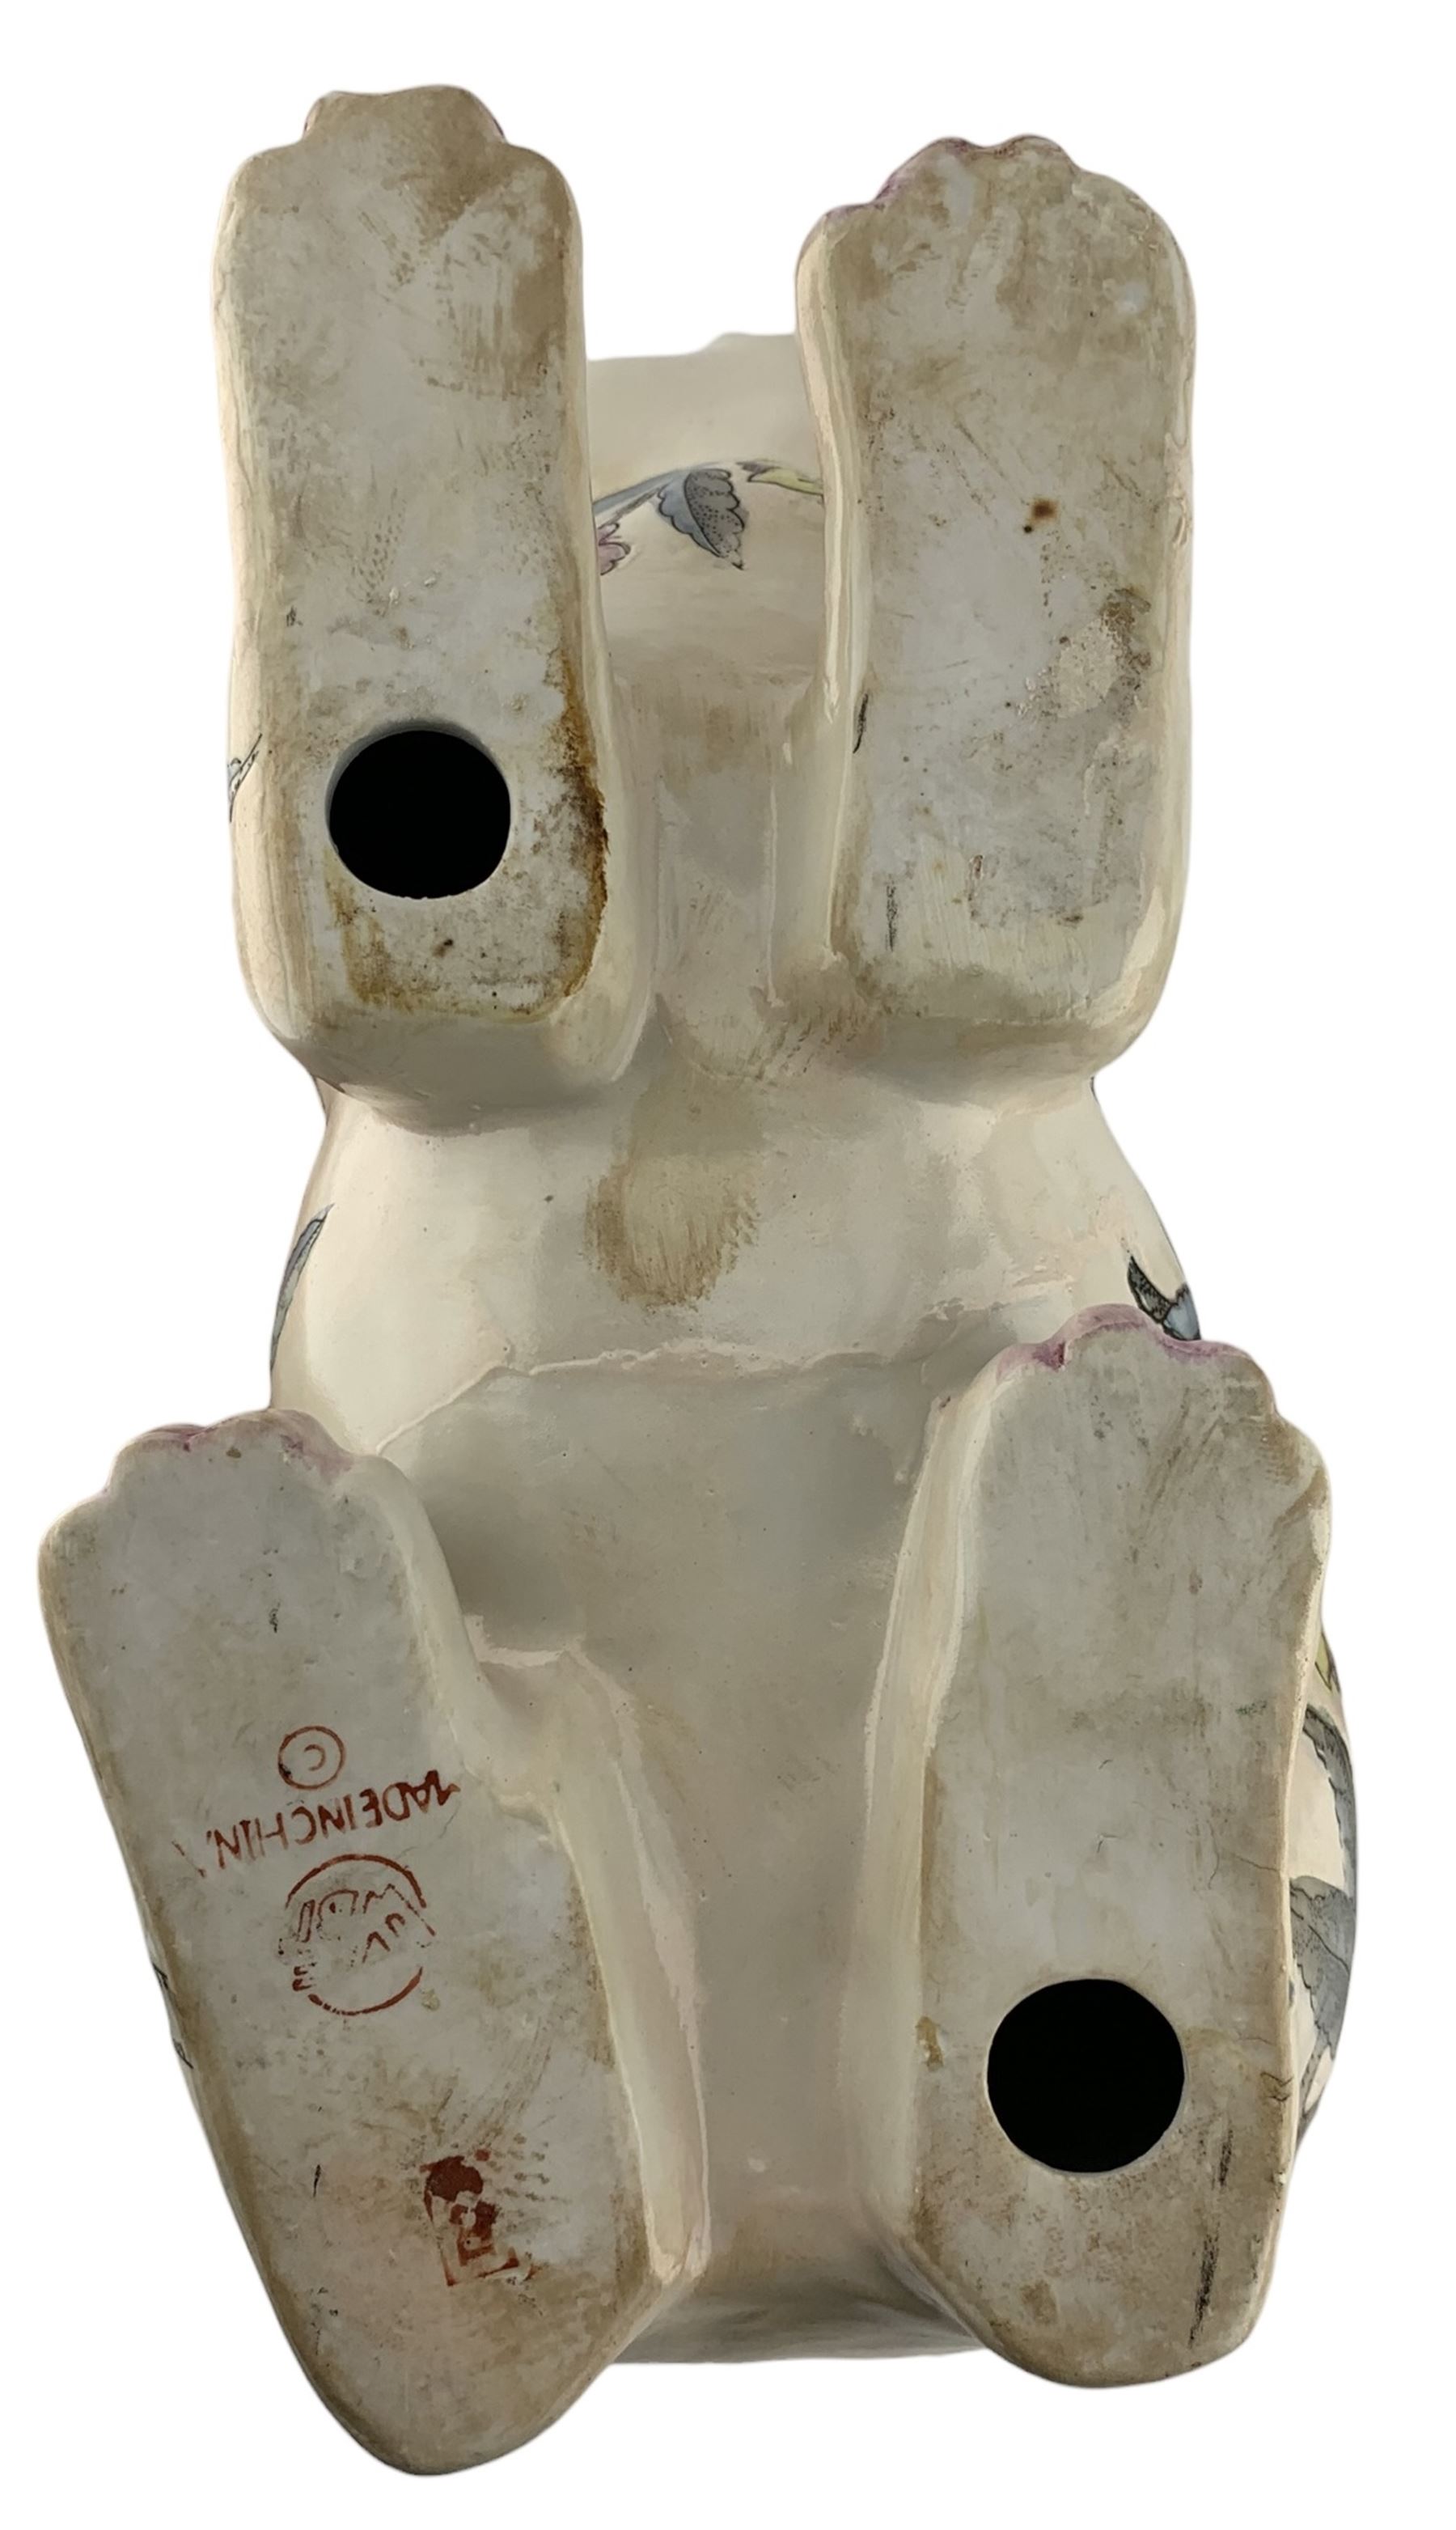 Pair of mid 20th century Chinese pottery Rabbits - Image 4 of 6